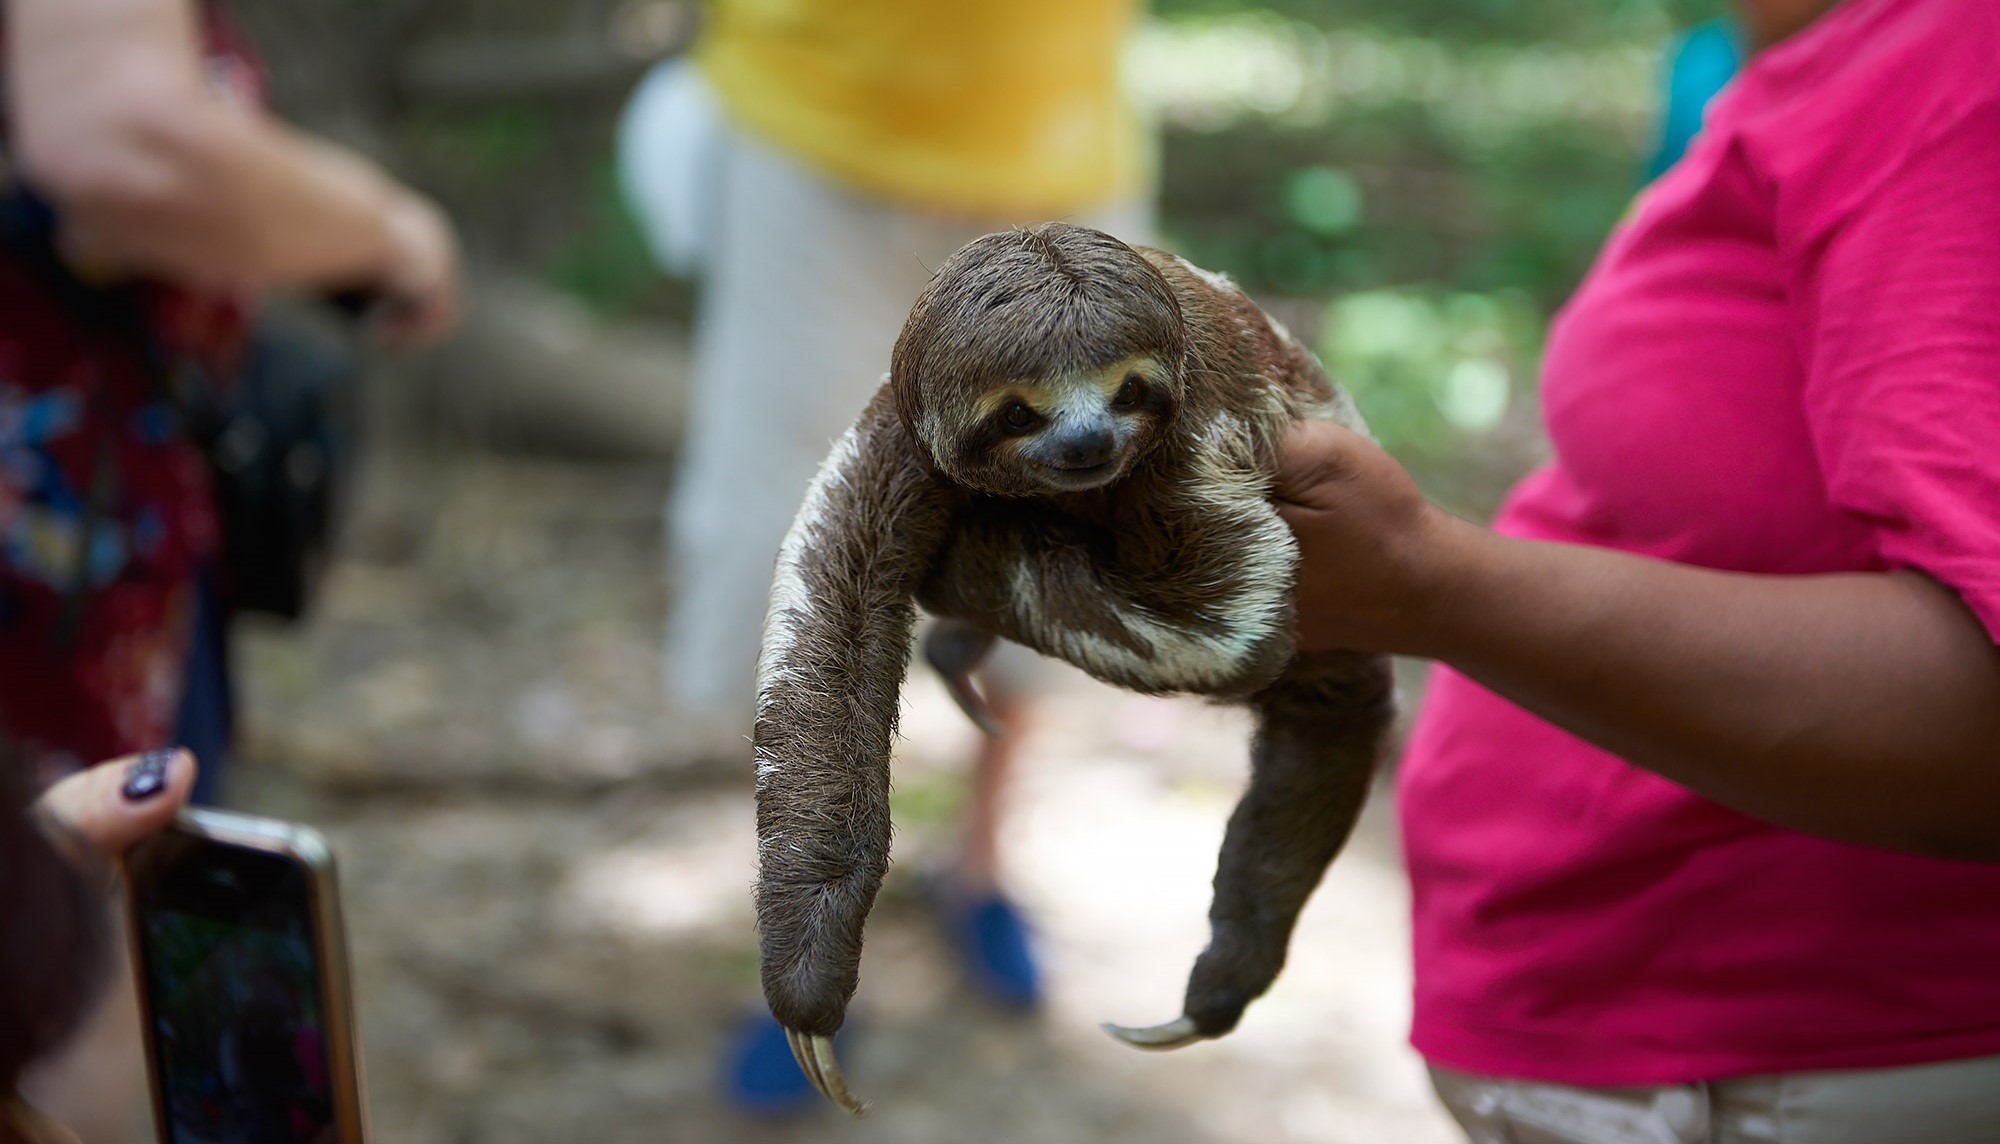 The Wildlife Selfie Problem - The Sloth Conservation Foundation